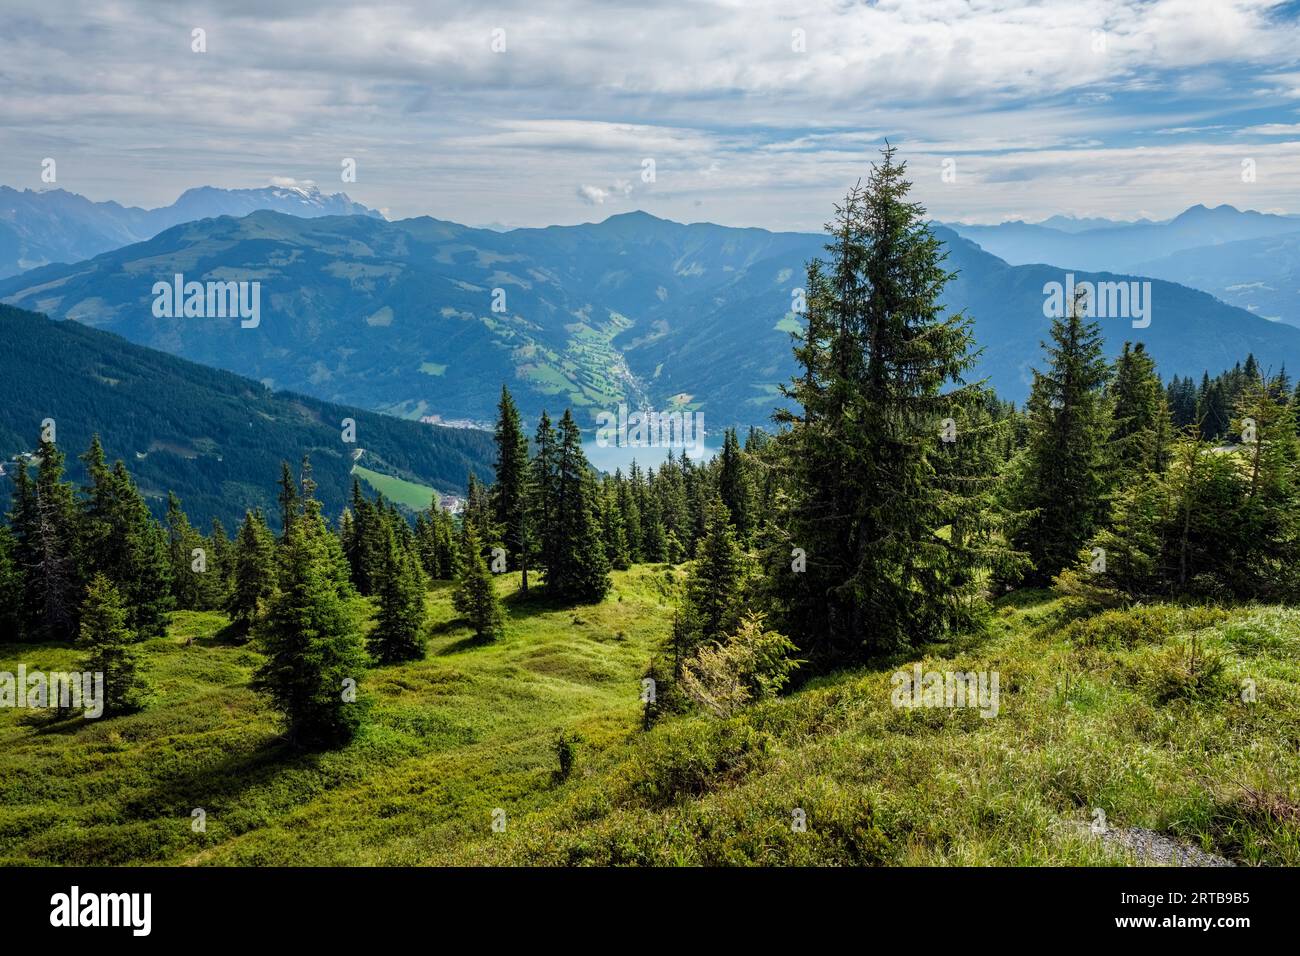 The view looking down on Zell am See from the Schmittenhohe mountain, Salzburgerland, Austria Stock Photo